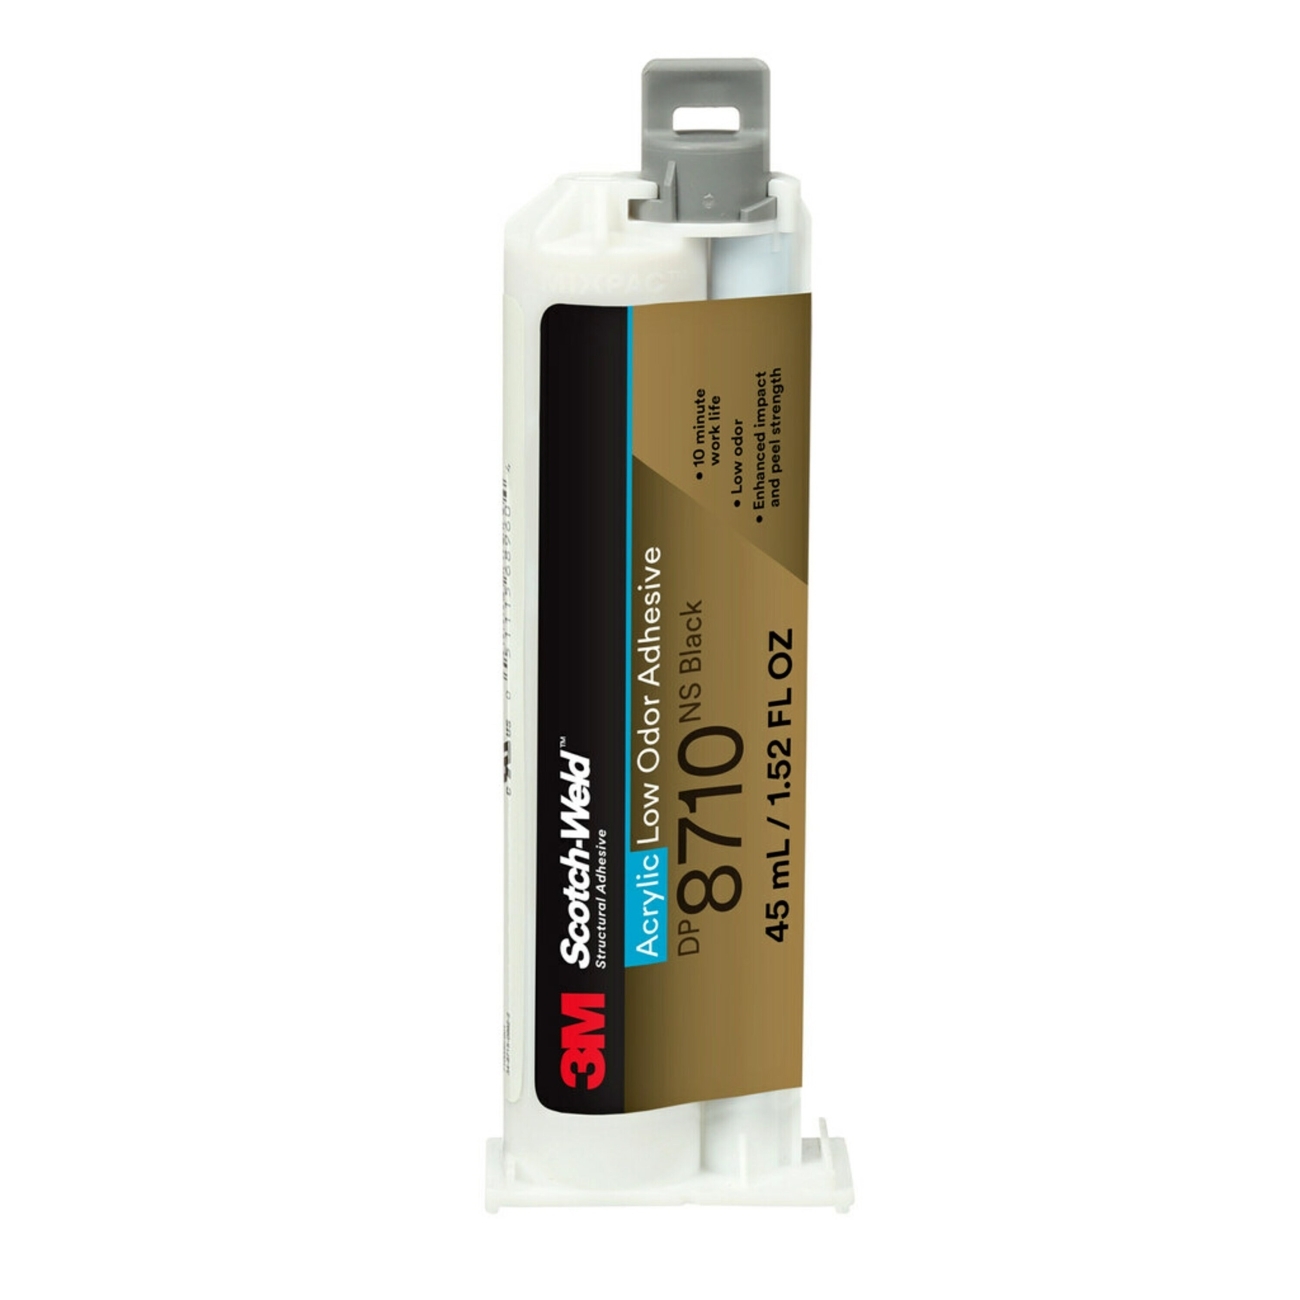 3M Scotch-Weld 2-component acrylic-based construction adhesive for the EPX System DP 8710 NS, black, 45 ml